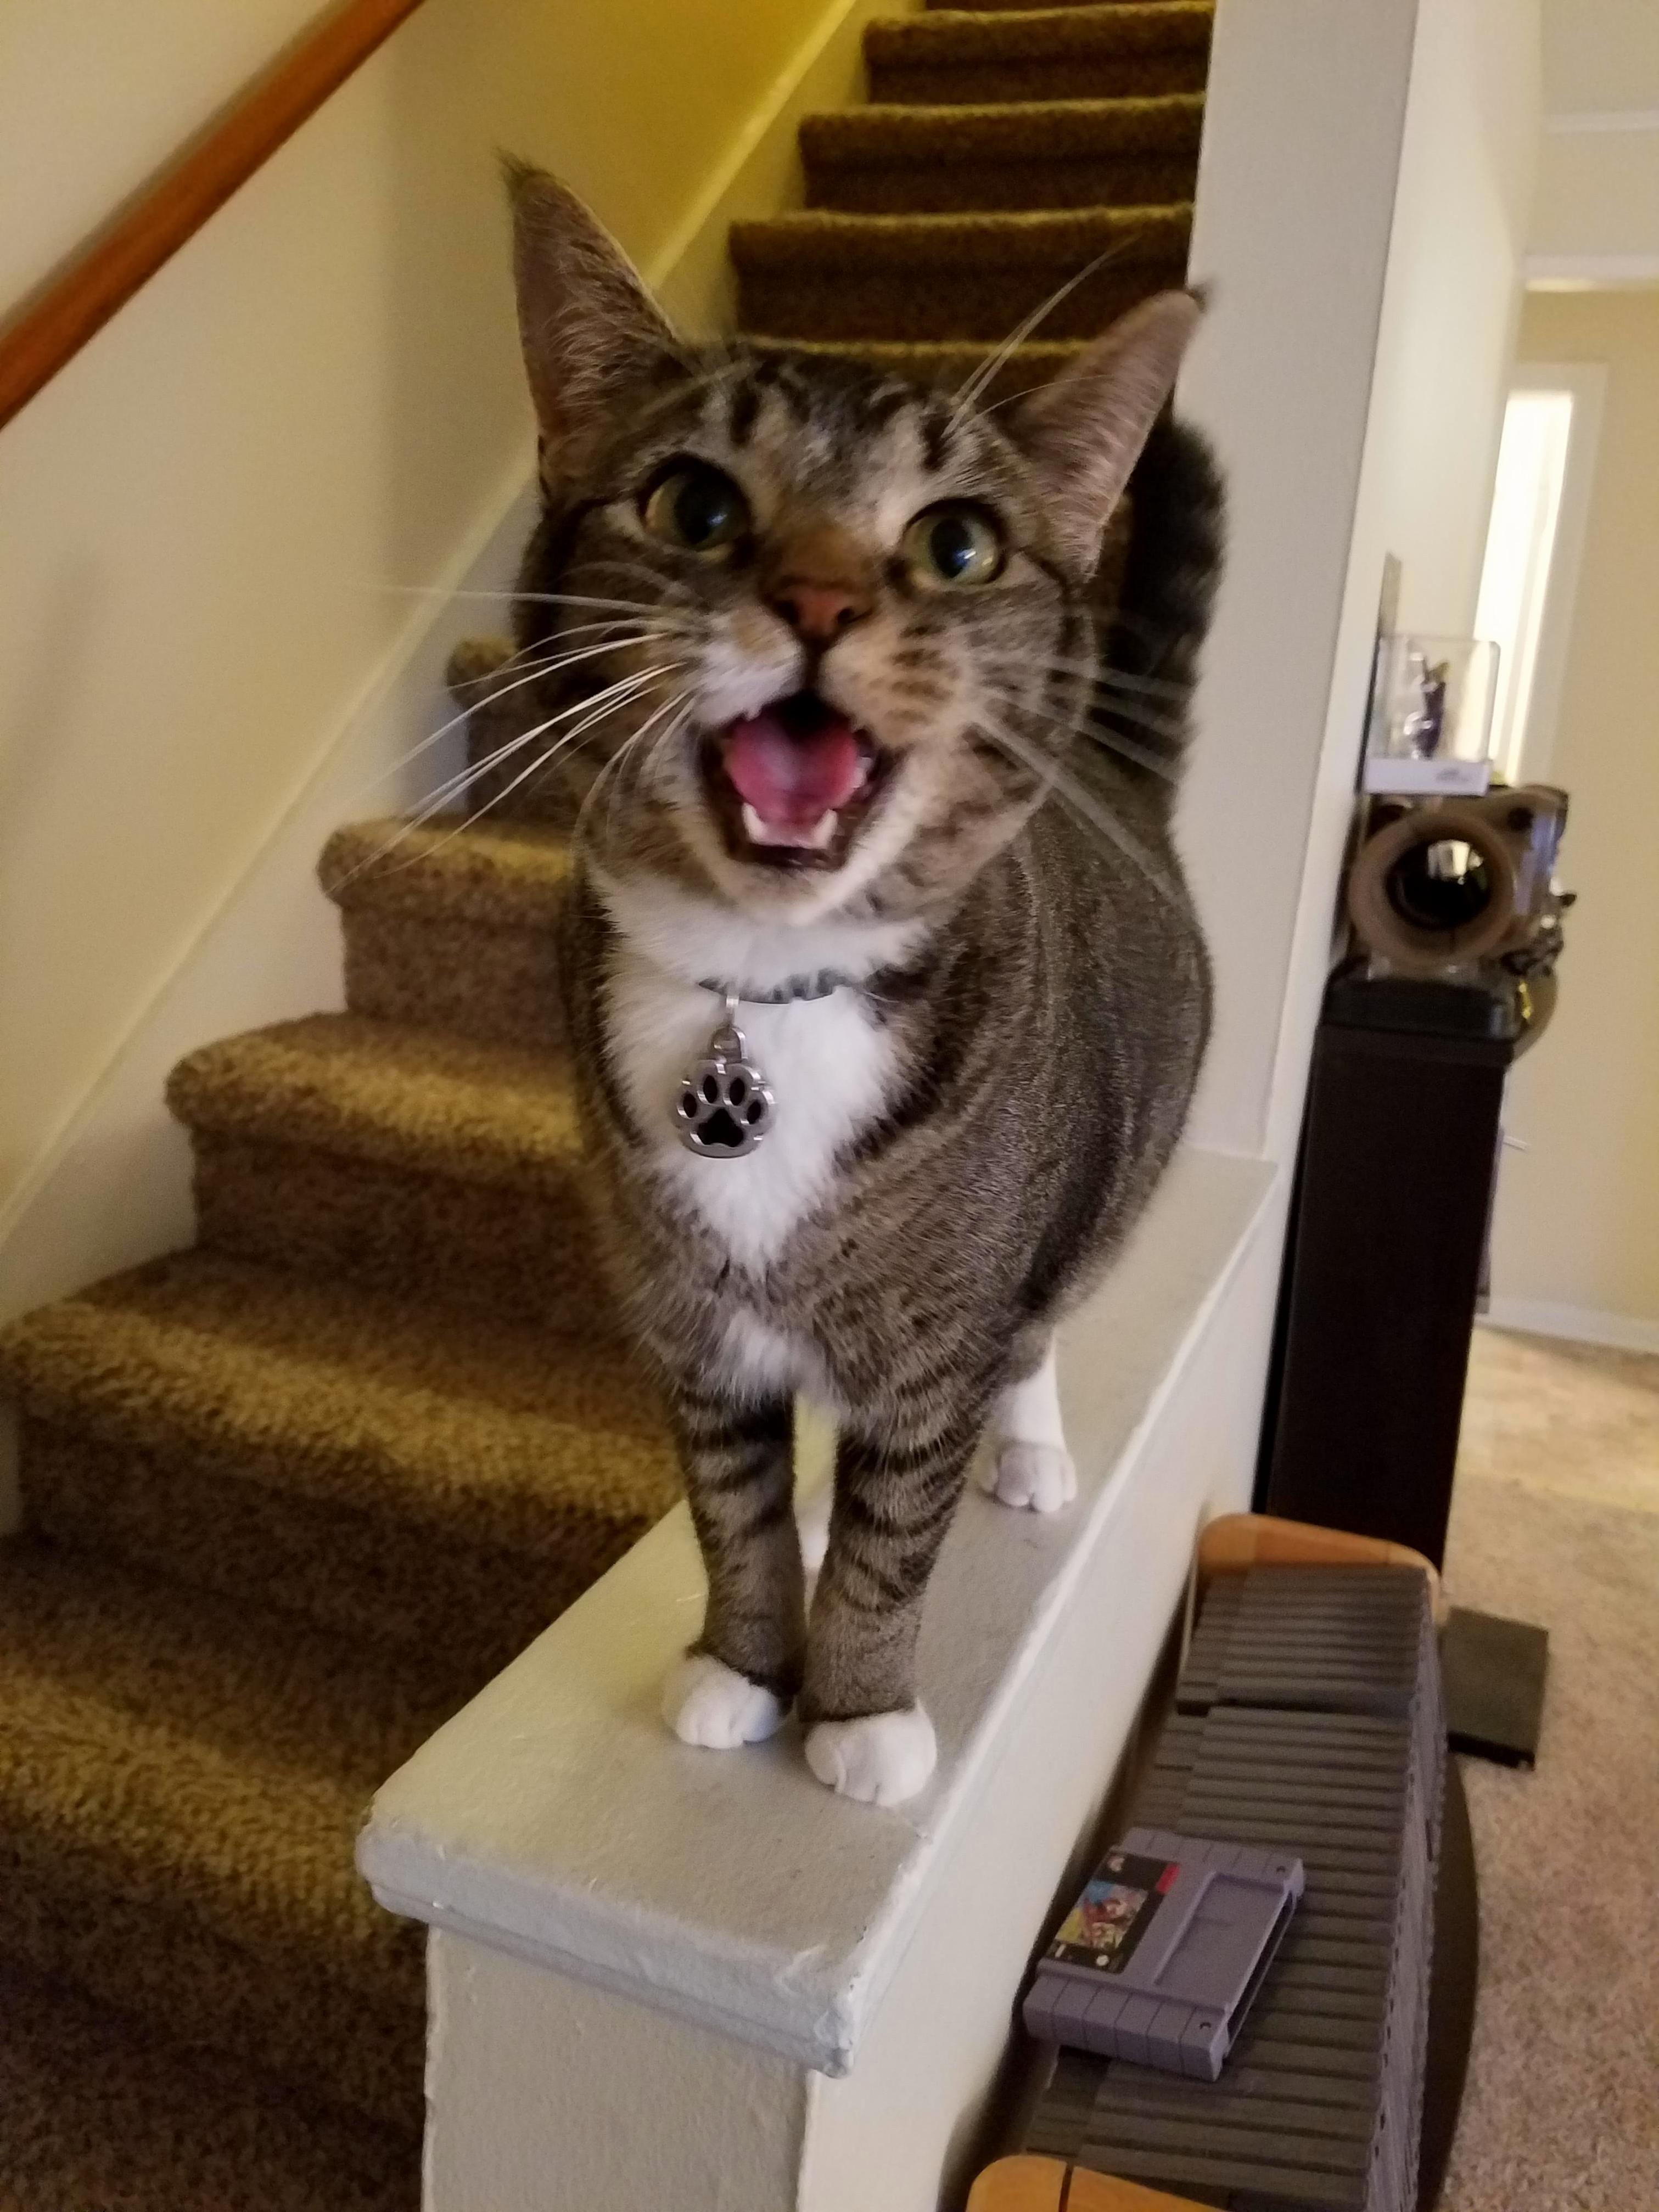 Caught him mid meow